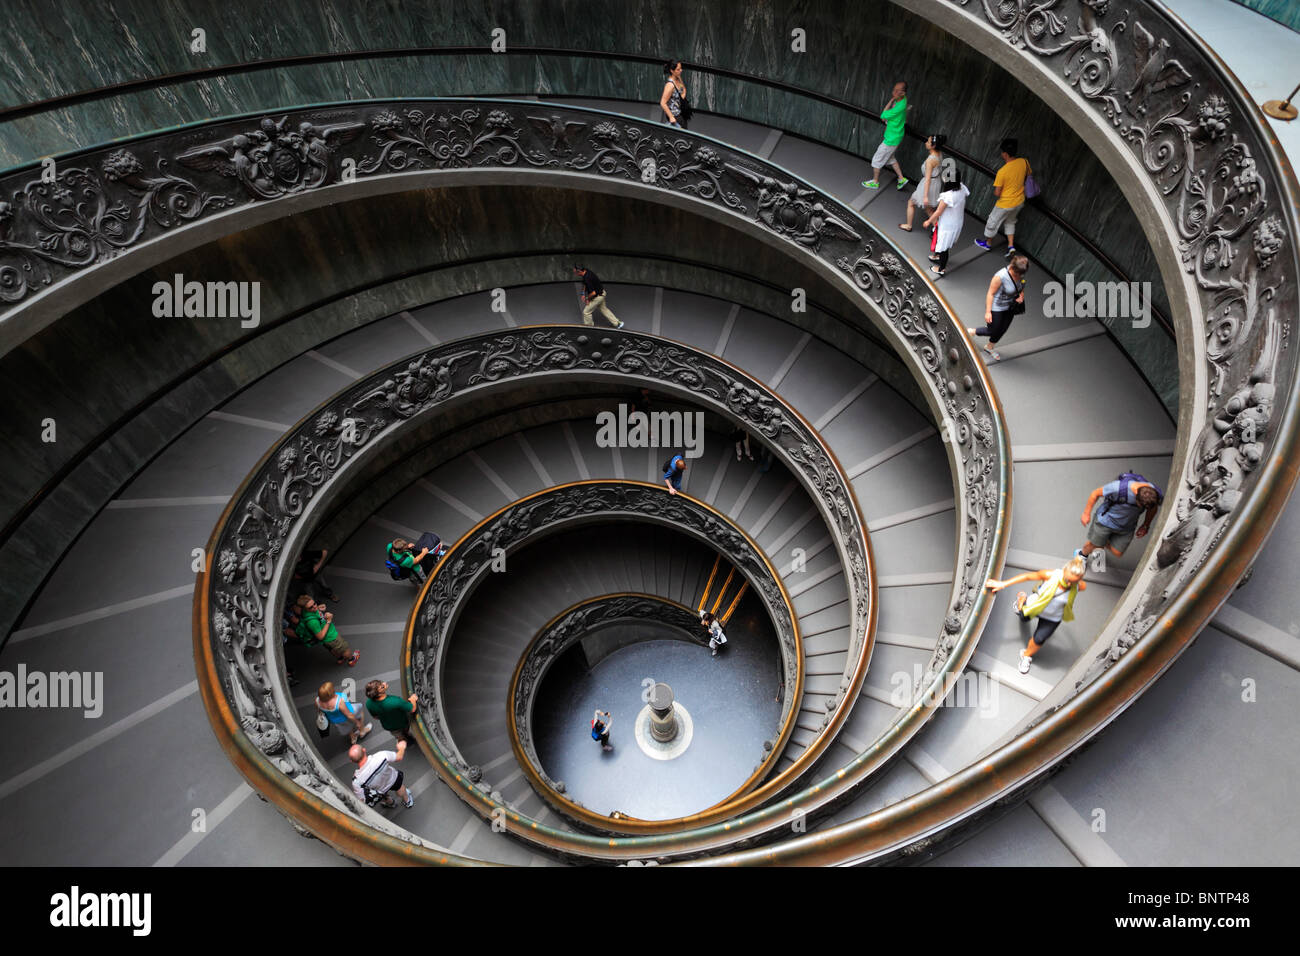 Spiral staircase in the Vatican museums (Italian: Musei Vaticani) Stock Photo